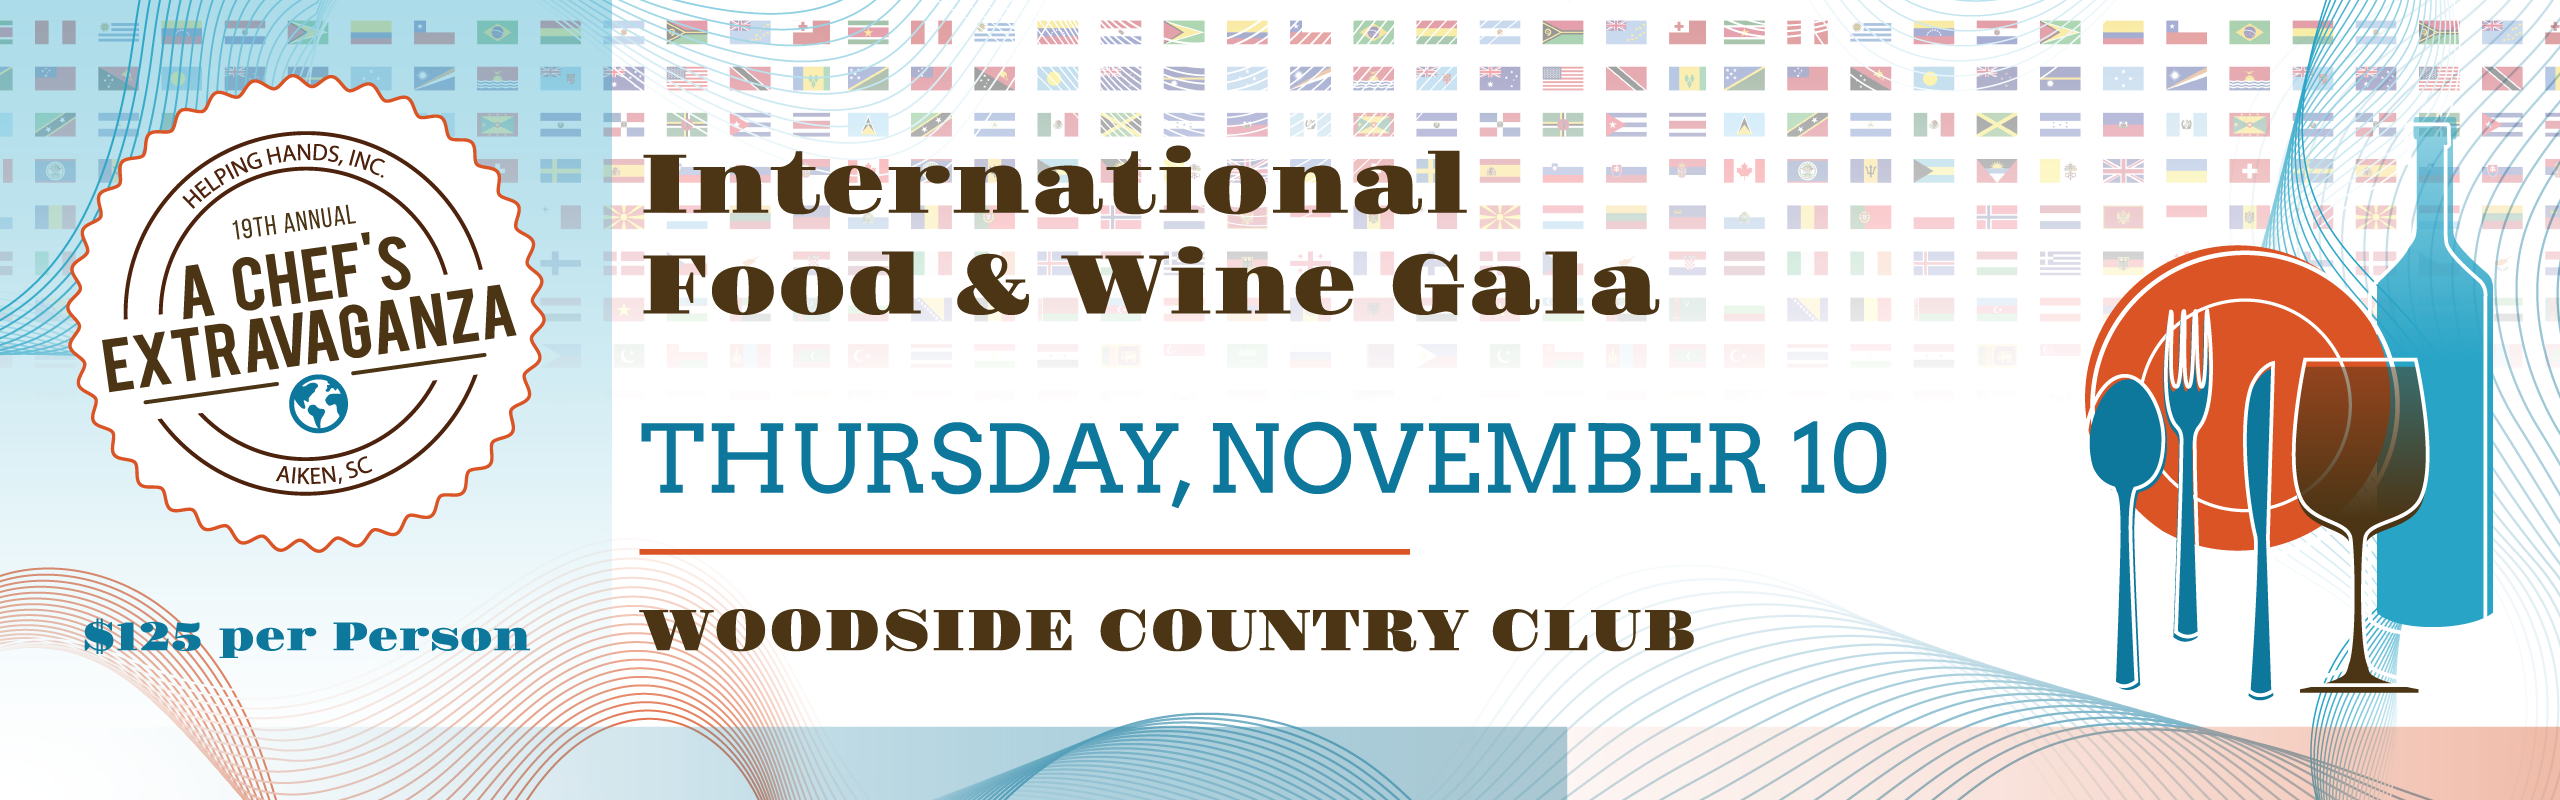 A Chef's Extravaganza 2022, International Food & Wine Gala, Thursday, November 10, Woodside Country Club, $125 per person